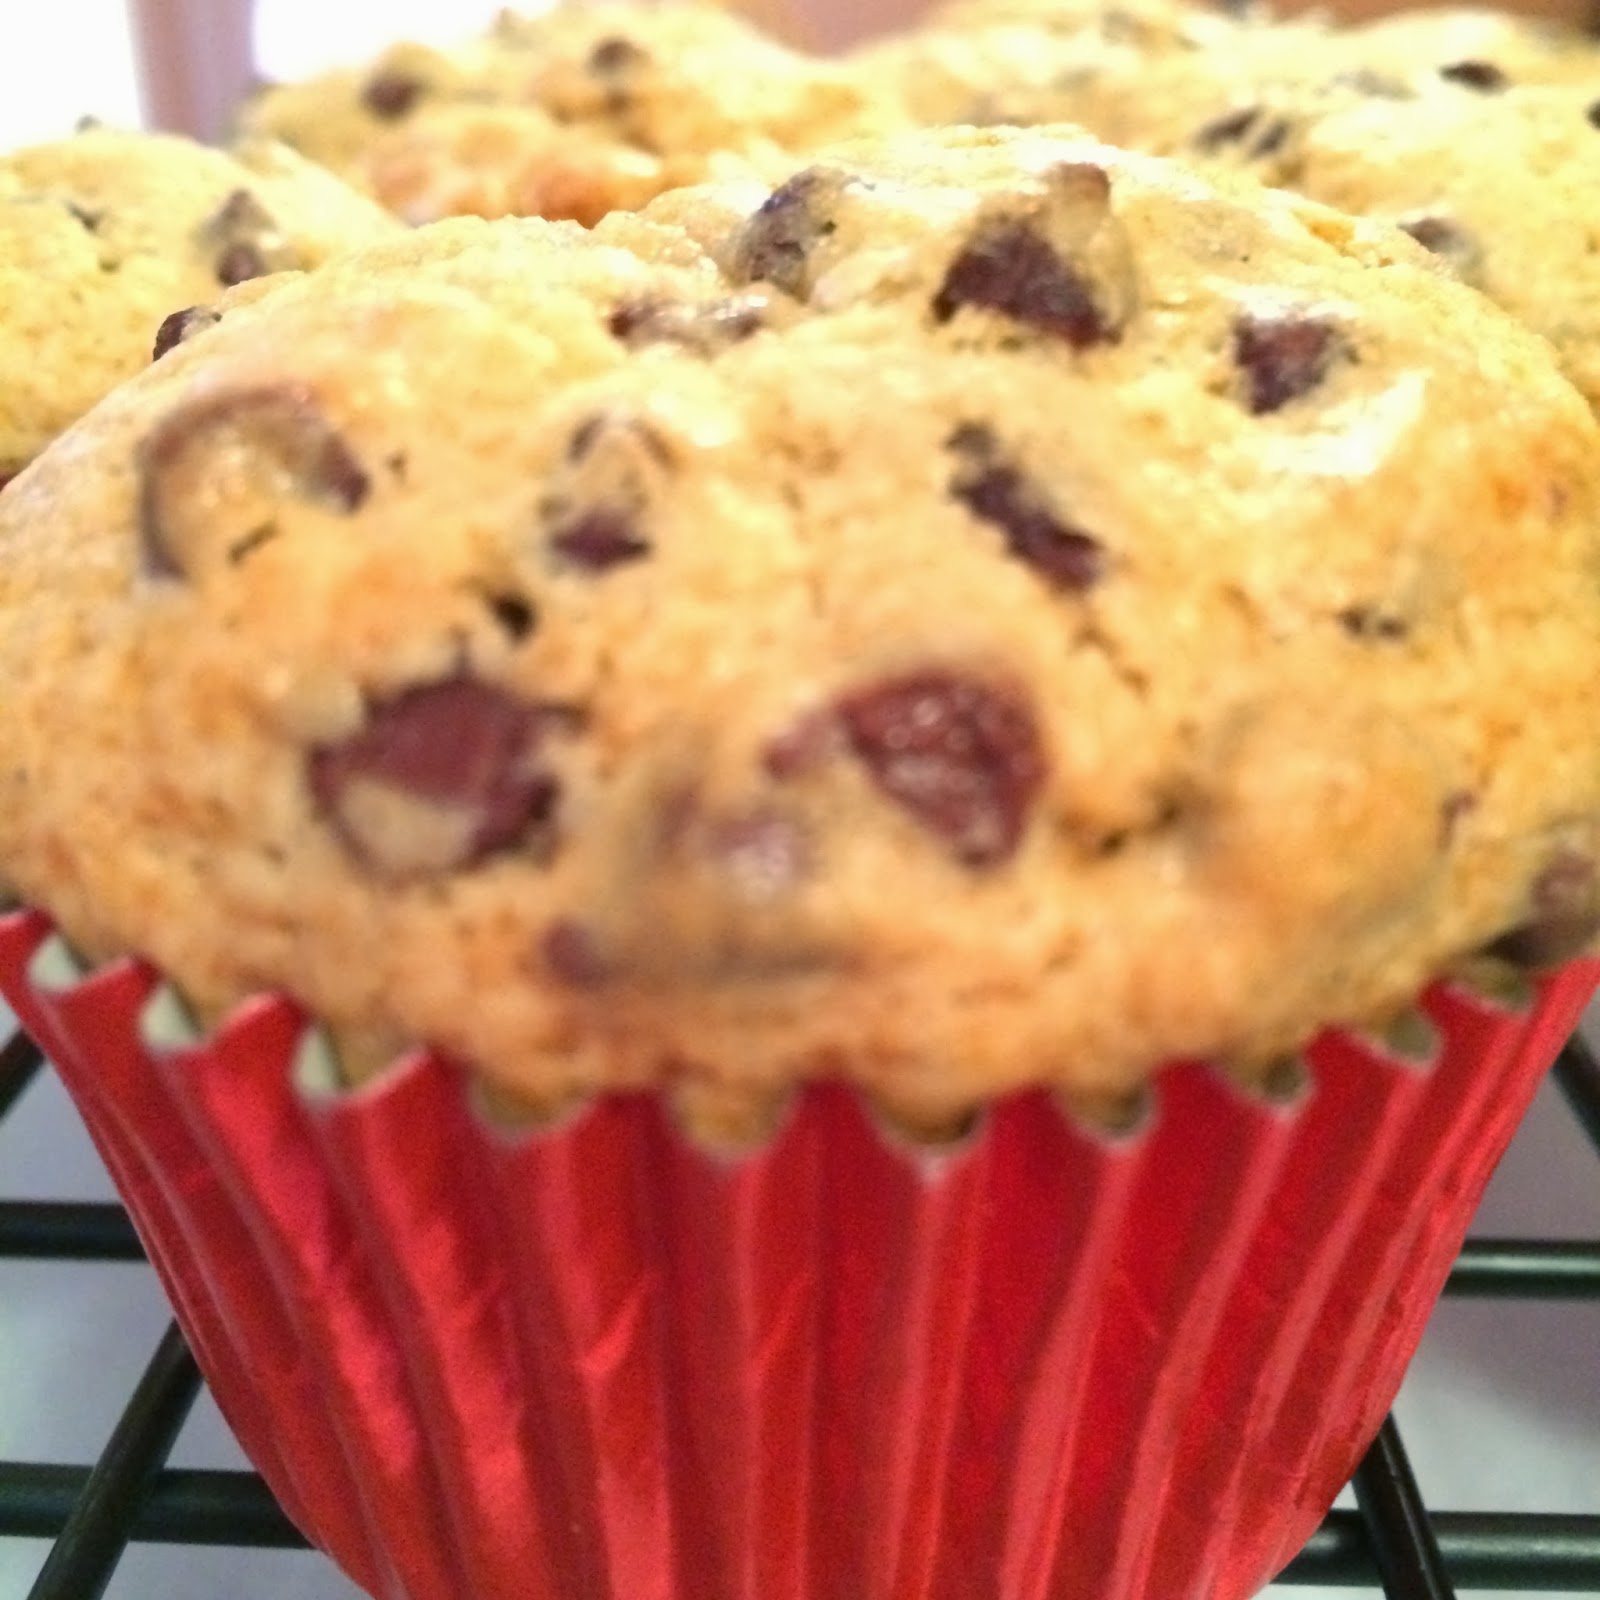 LIFE is better in PINK: Chocolate Chip Muffins